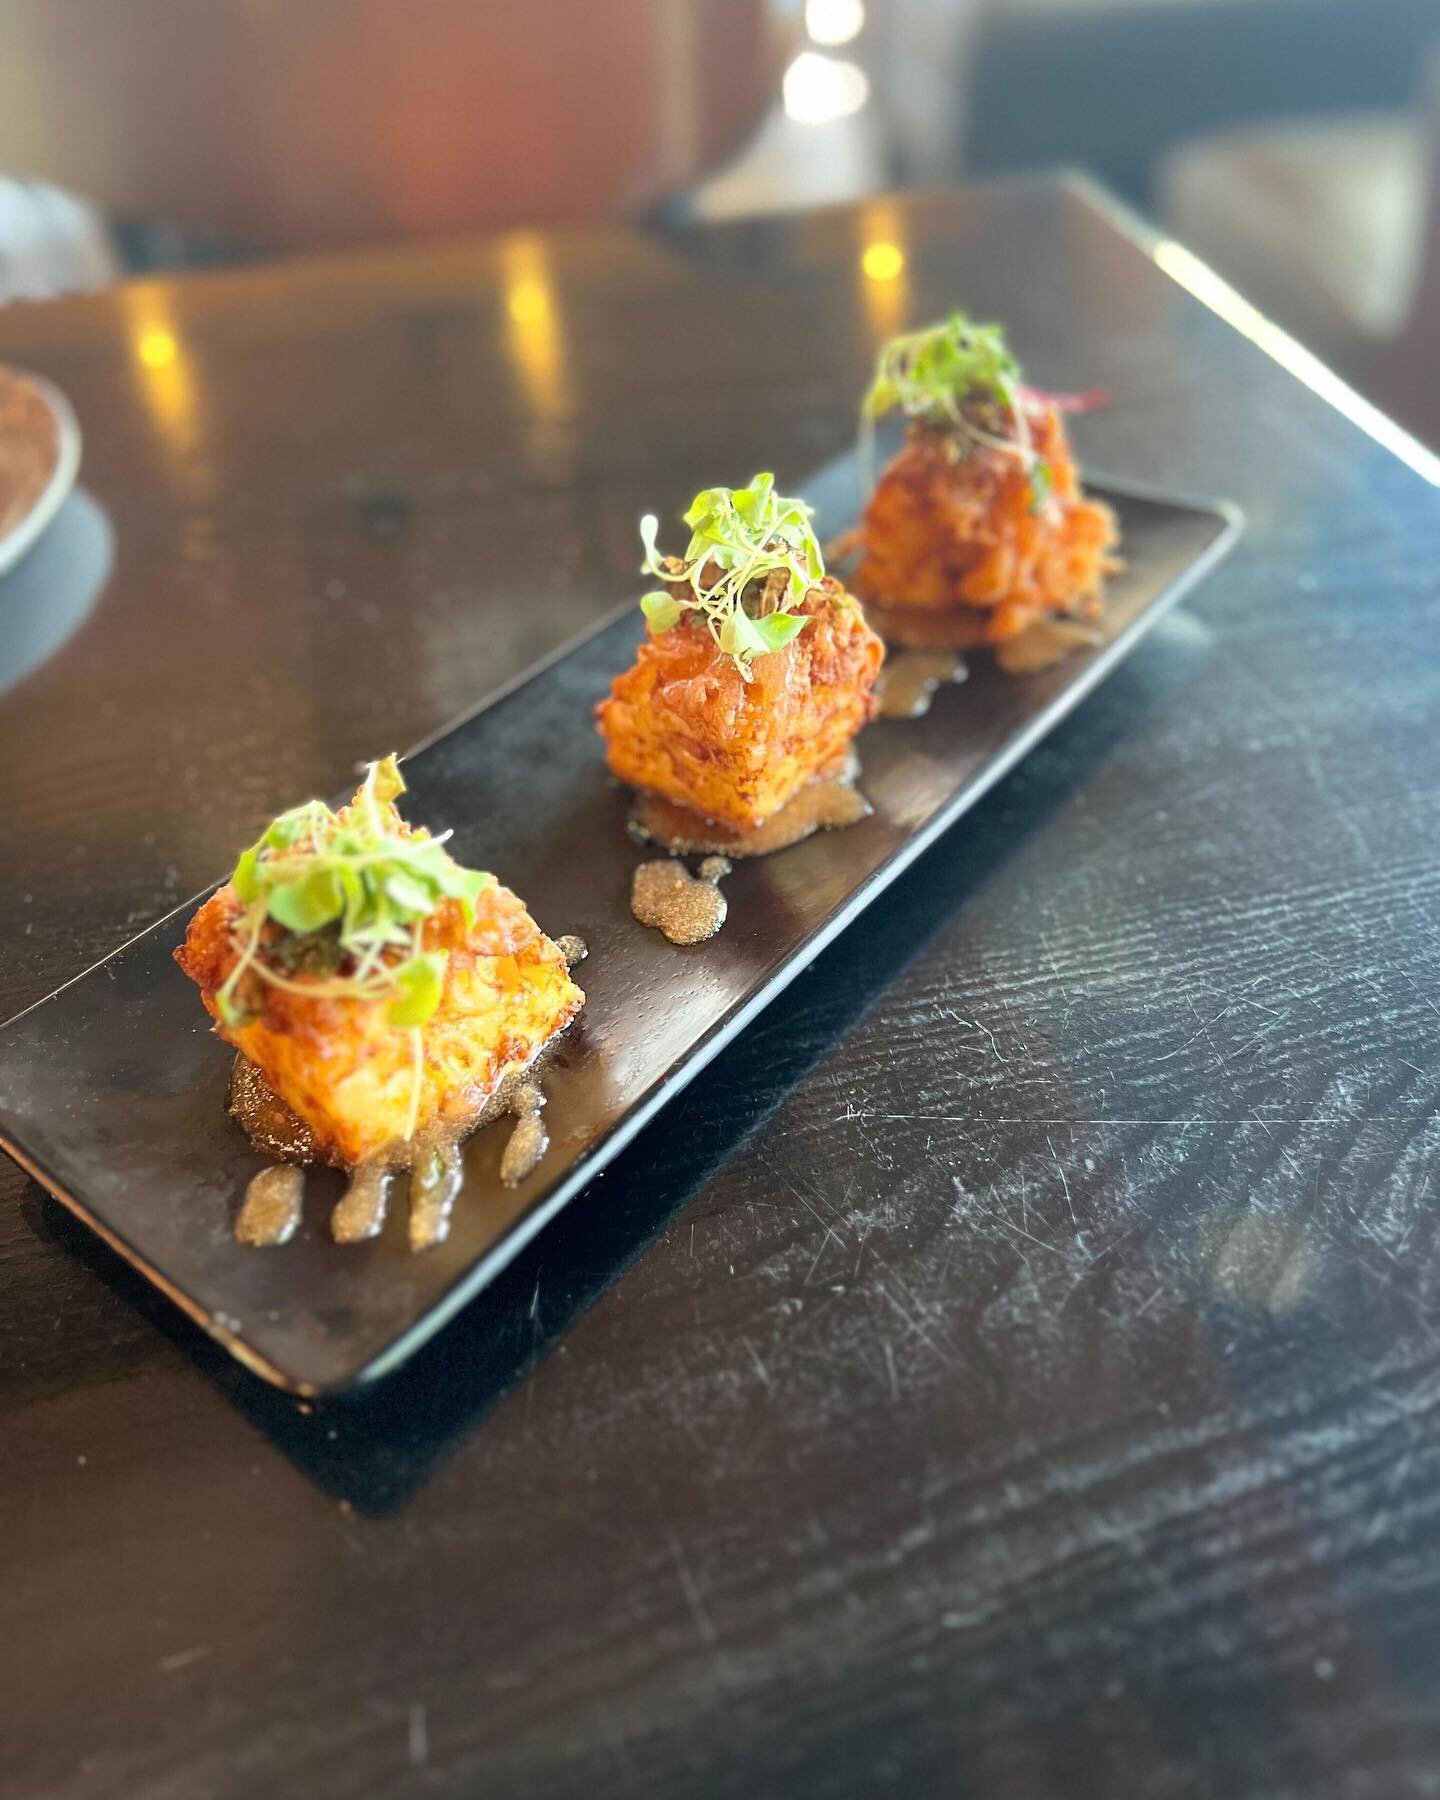 Treat yourself with our Mac &amp; cheese bites 😌Fried pulled pork Mac &amp; cheese stuffed with black eye peas, and braised greens. Topped with fried brussel sprouts and tomato jam 👏🏽